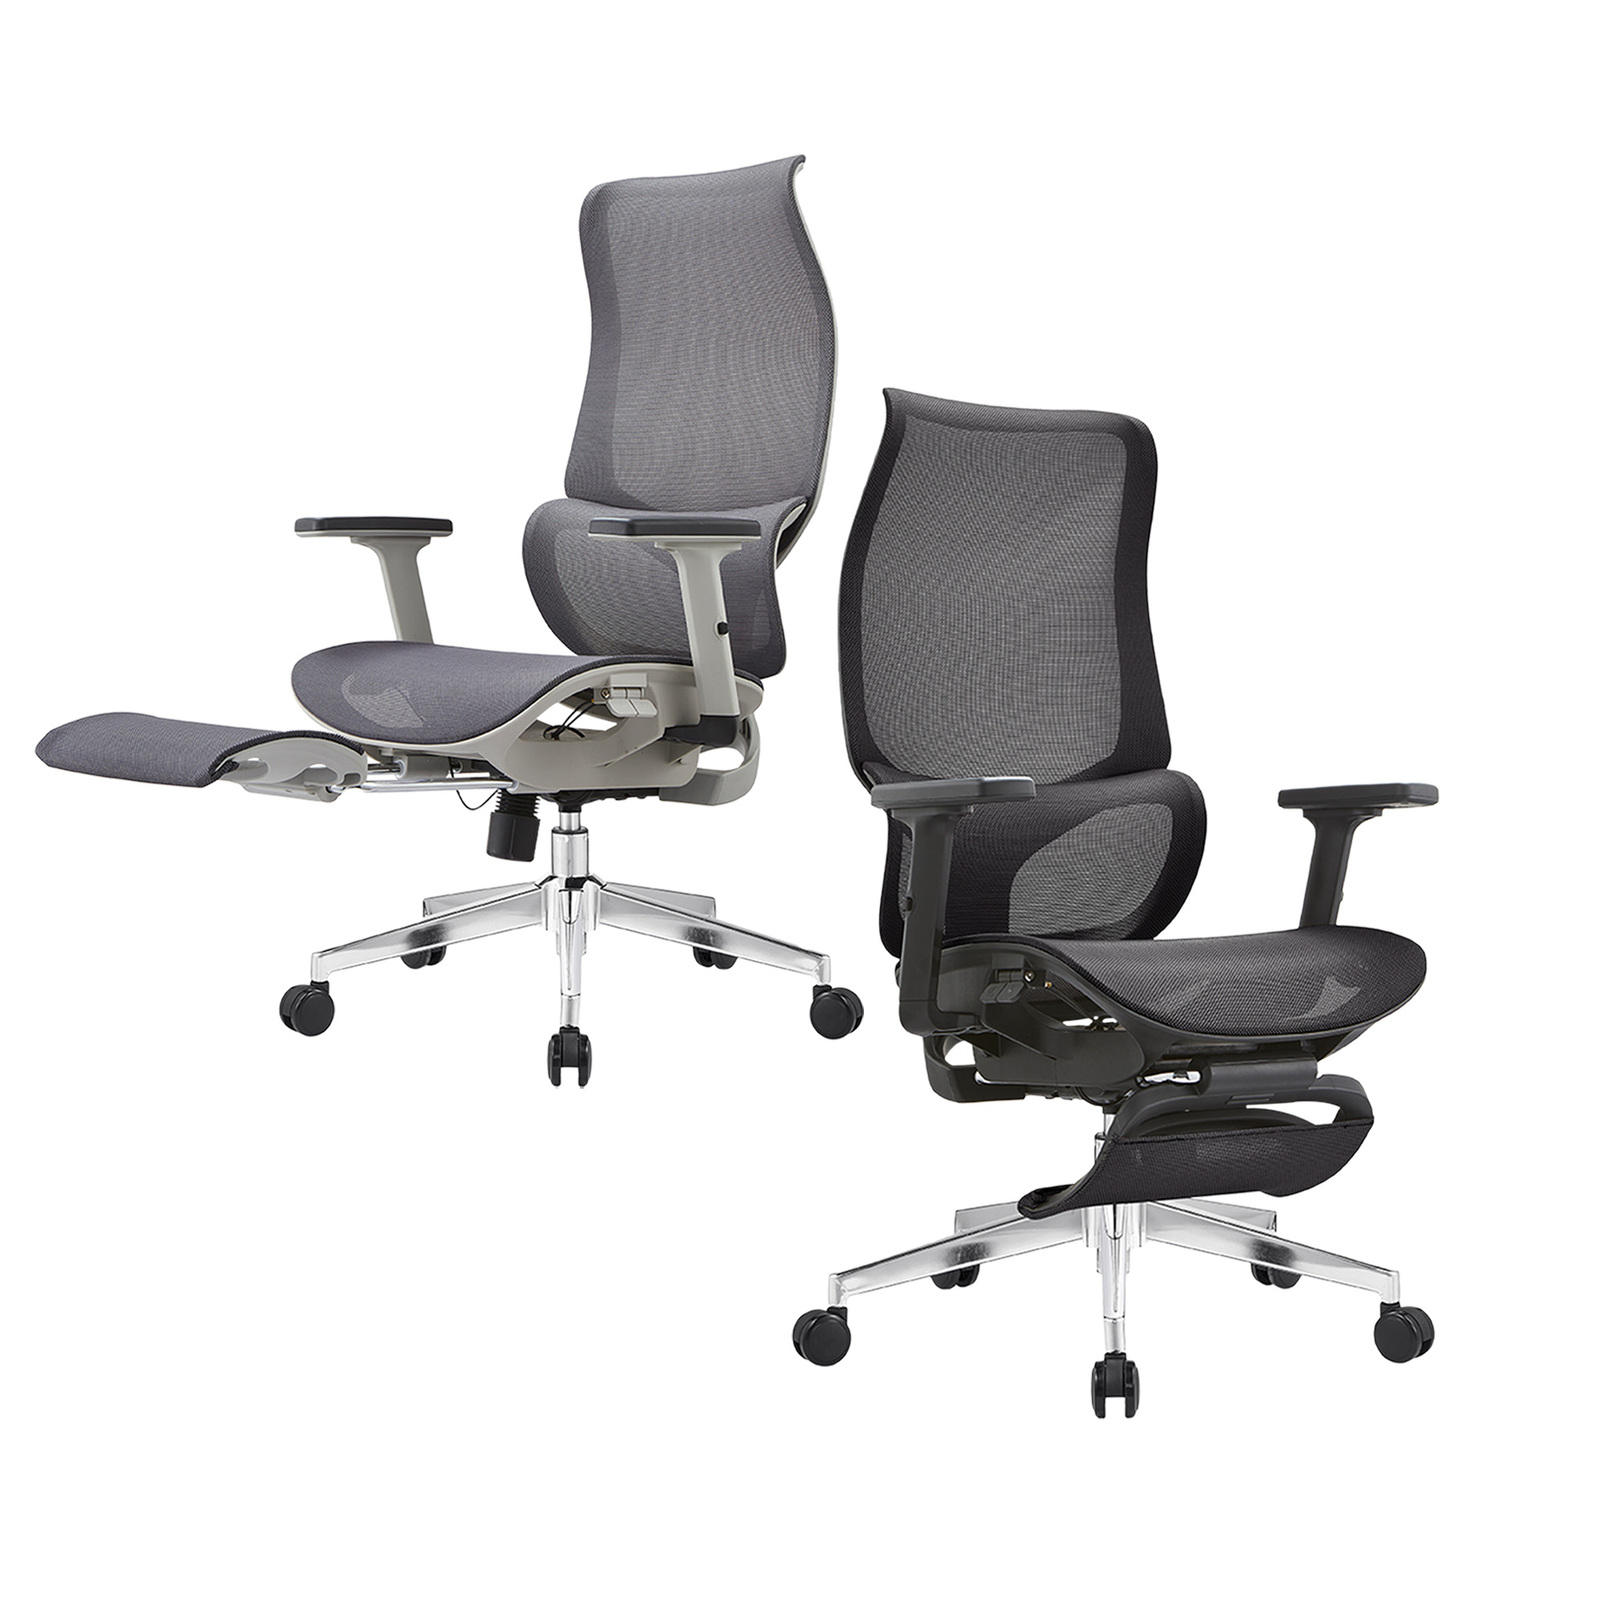 Ergonomic Mesh Gaming Office Chair Office Chairs Executive Footrest Computer Seat